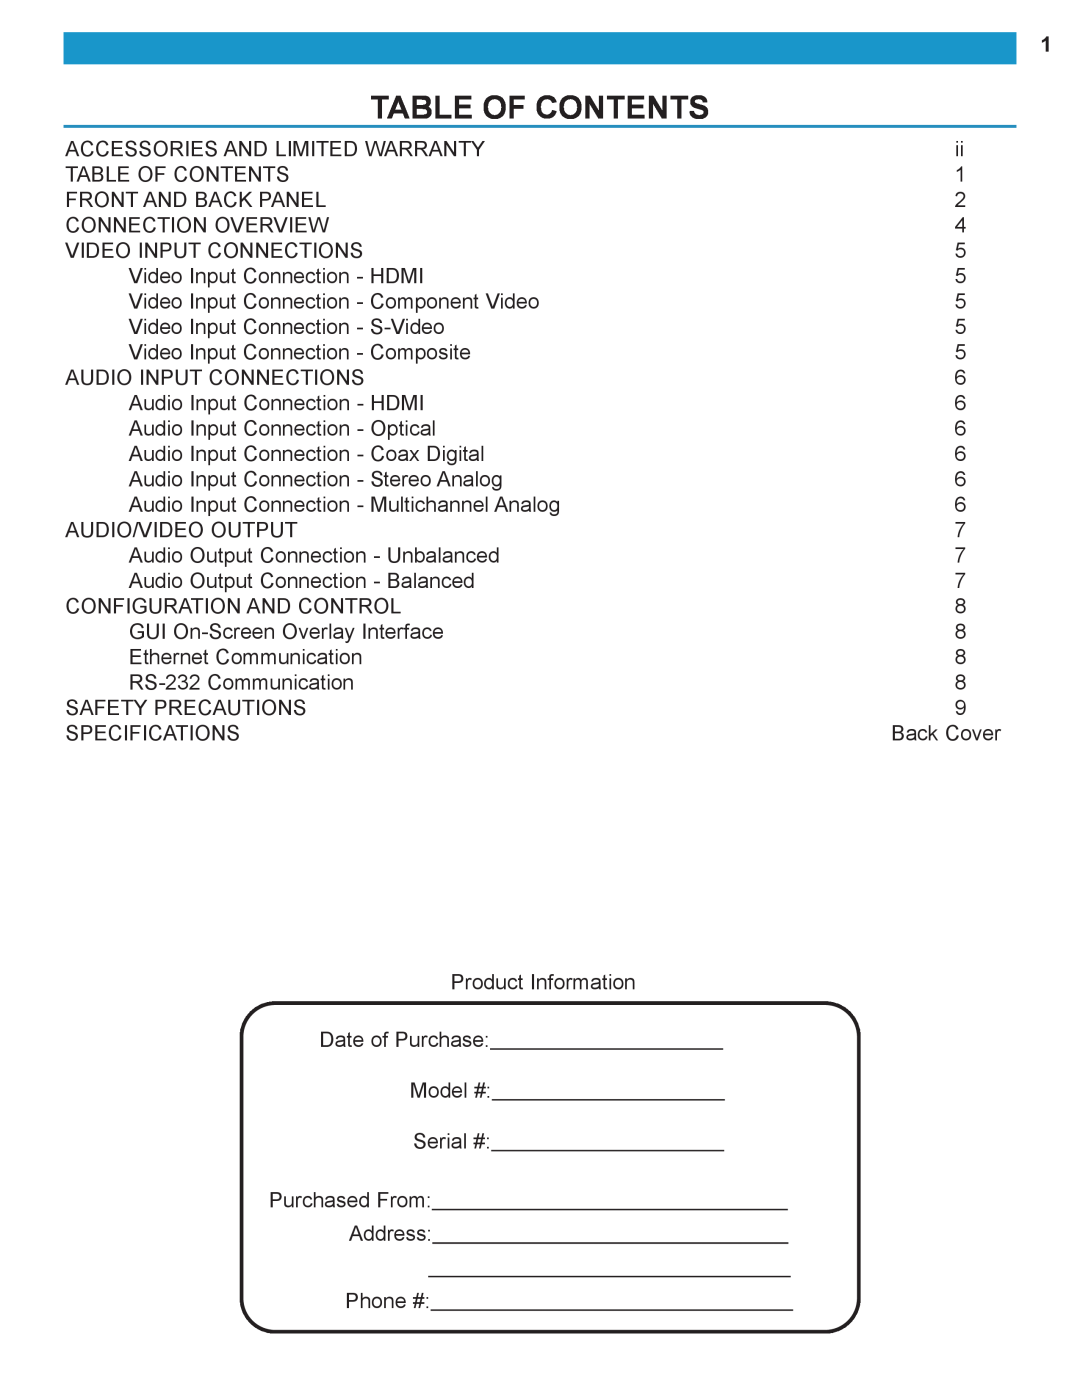 B&K HT 70 manual Table Of Contents 